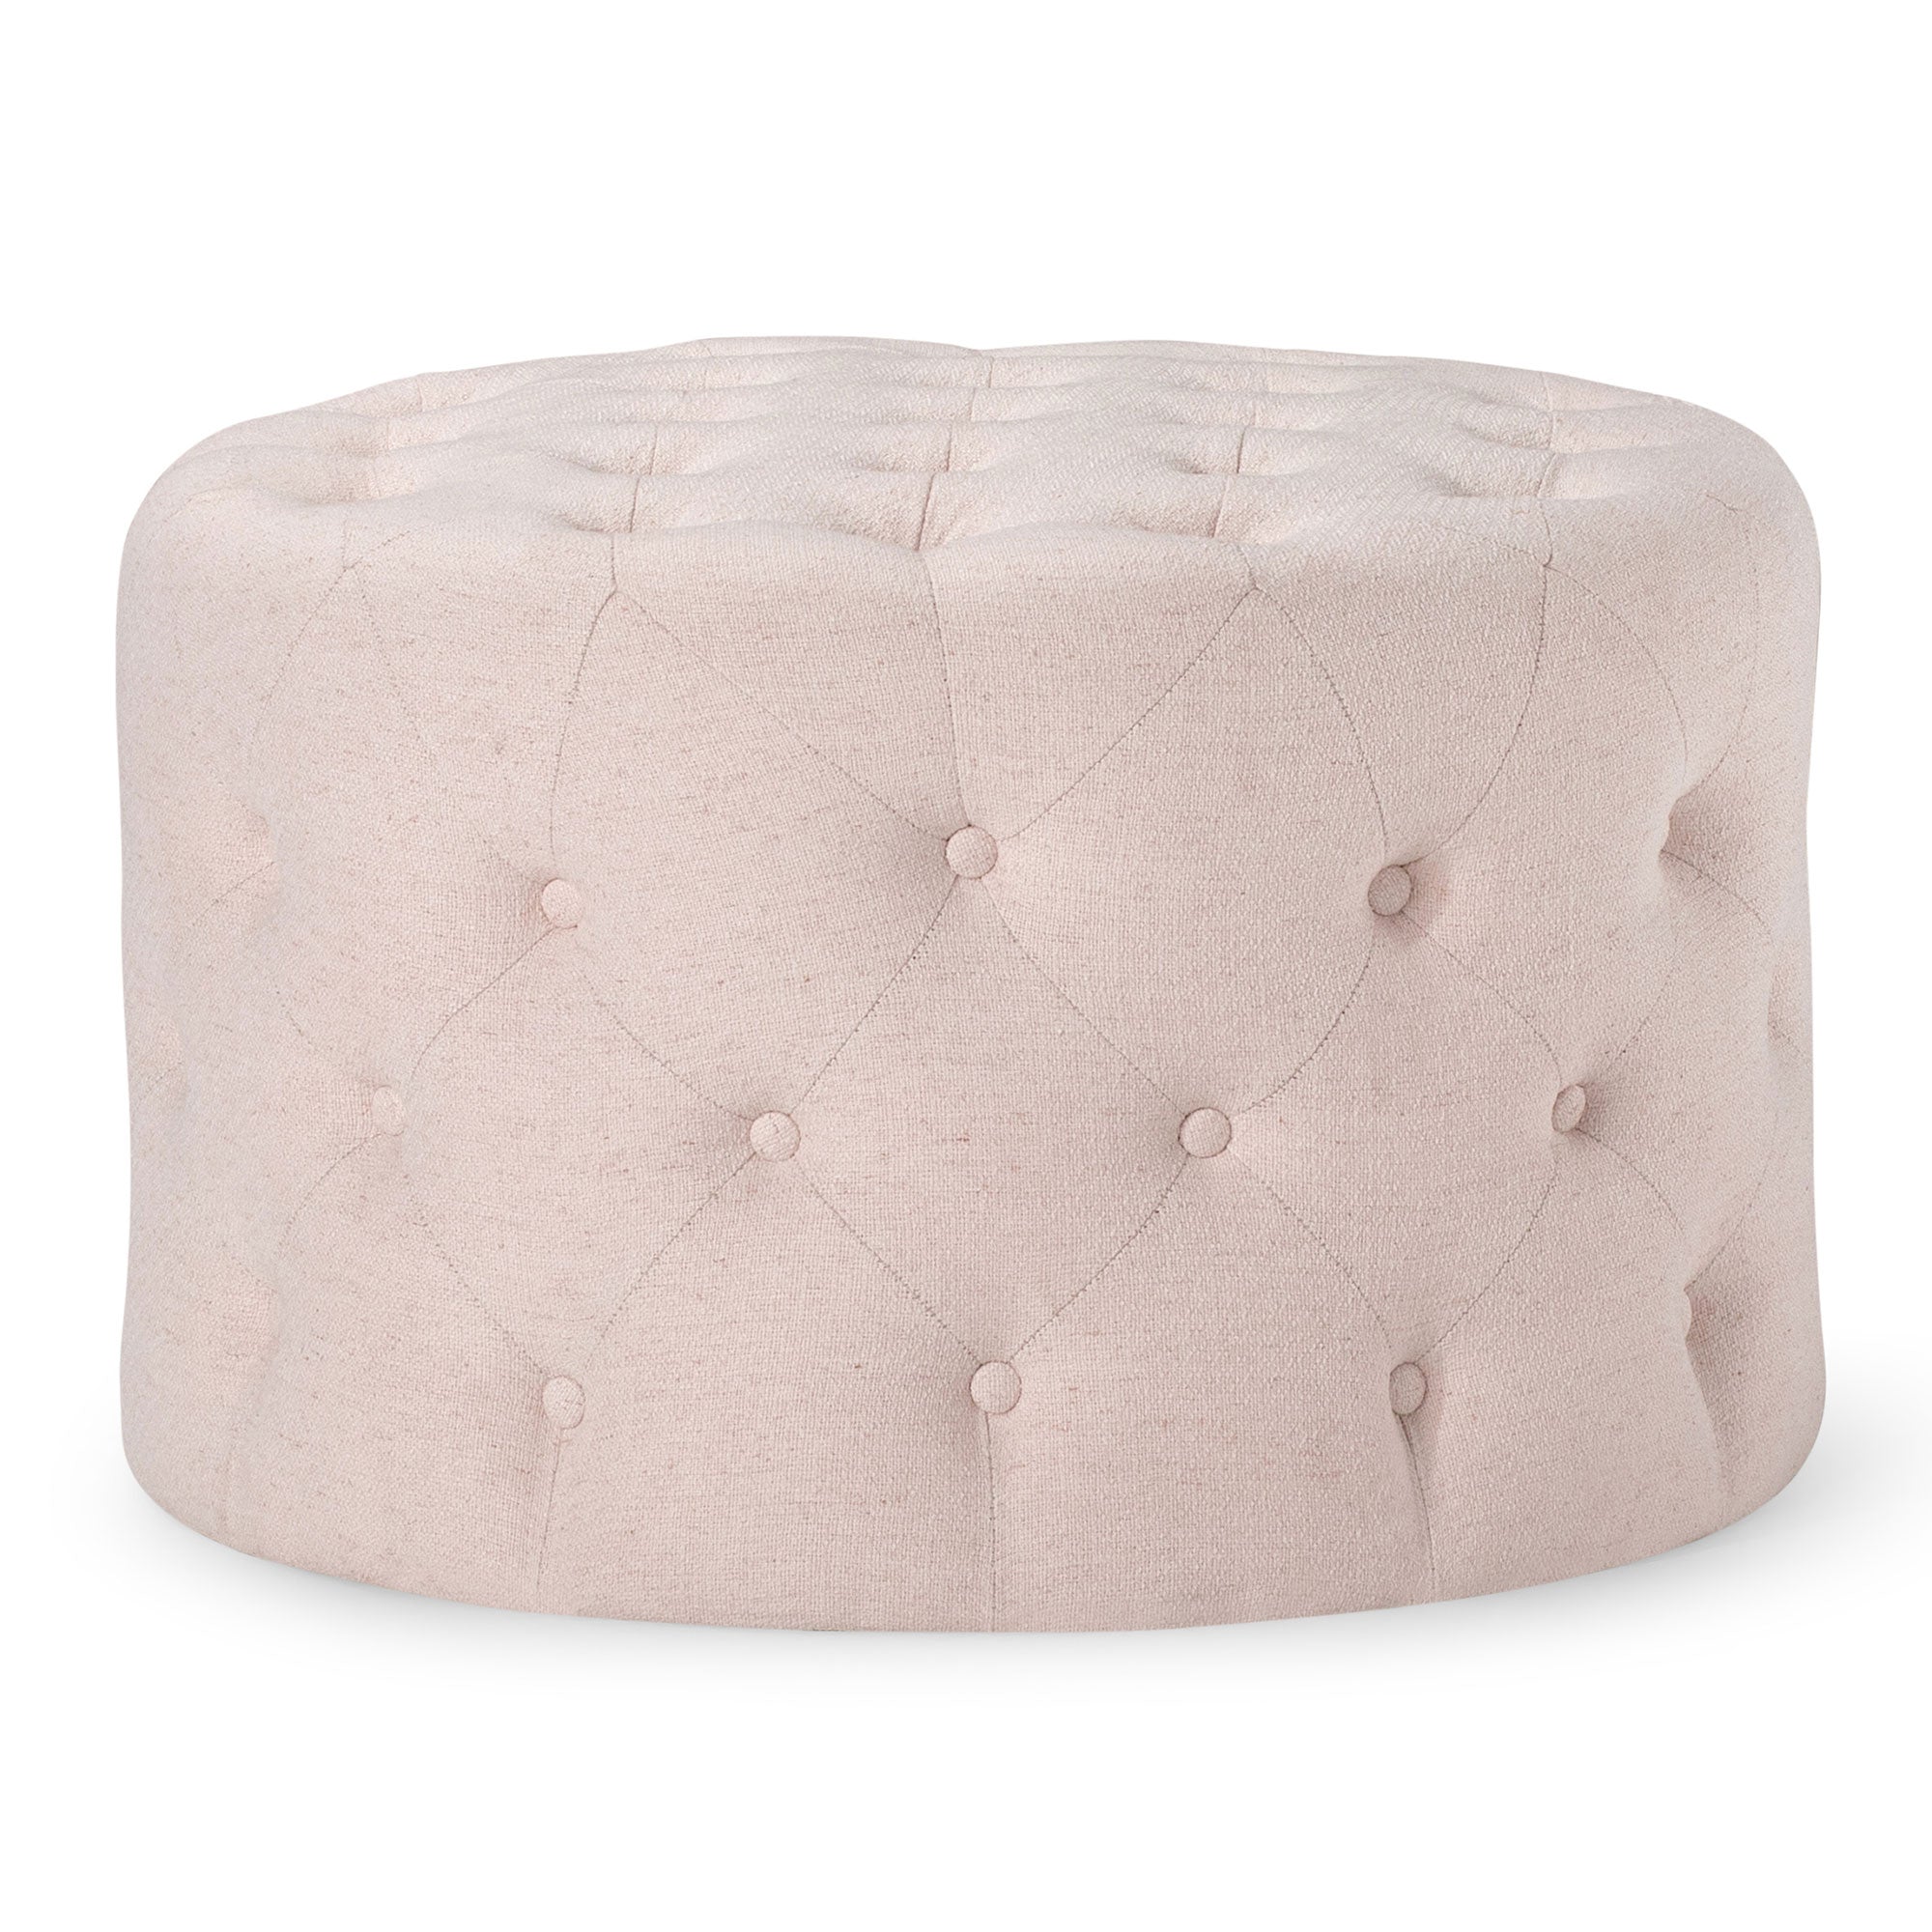 Maven-Lane-Marcy-Traditional-Round-Ottoman-in-Cream-Fabric-Upholstery-Ottomans-&-Poufs